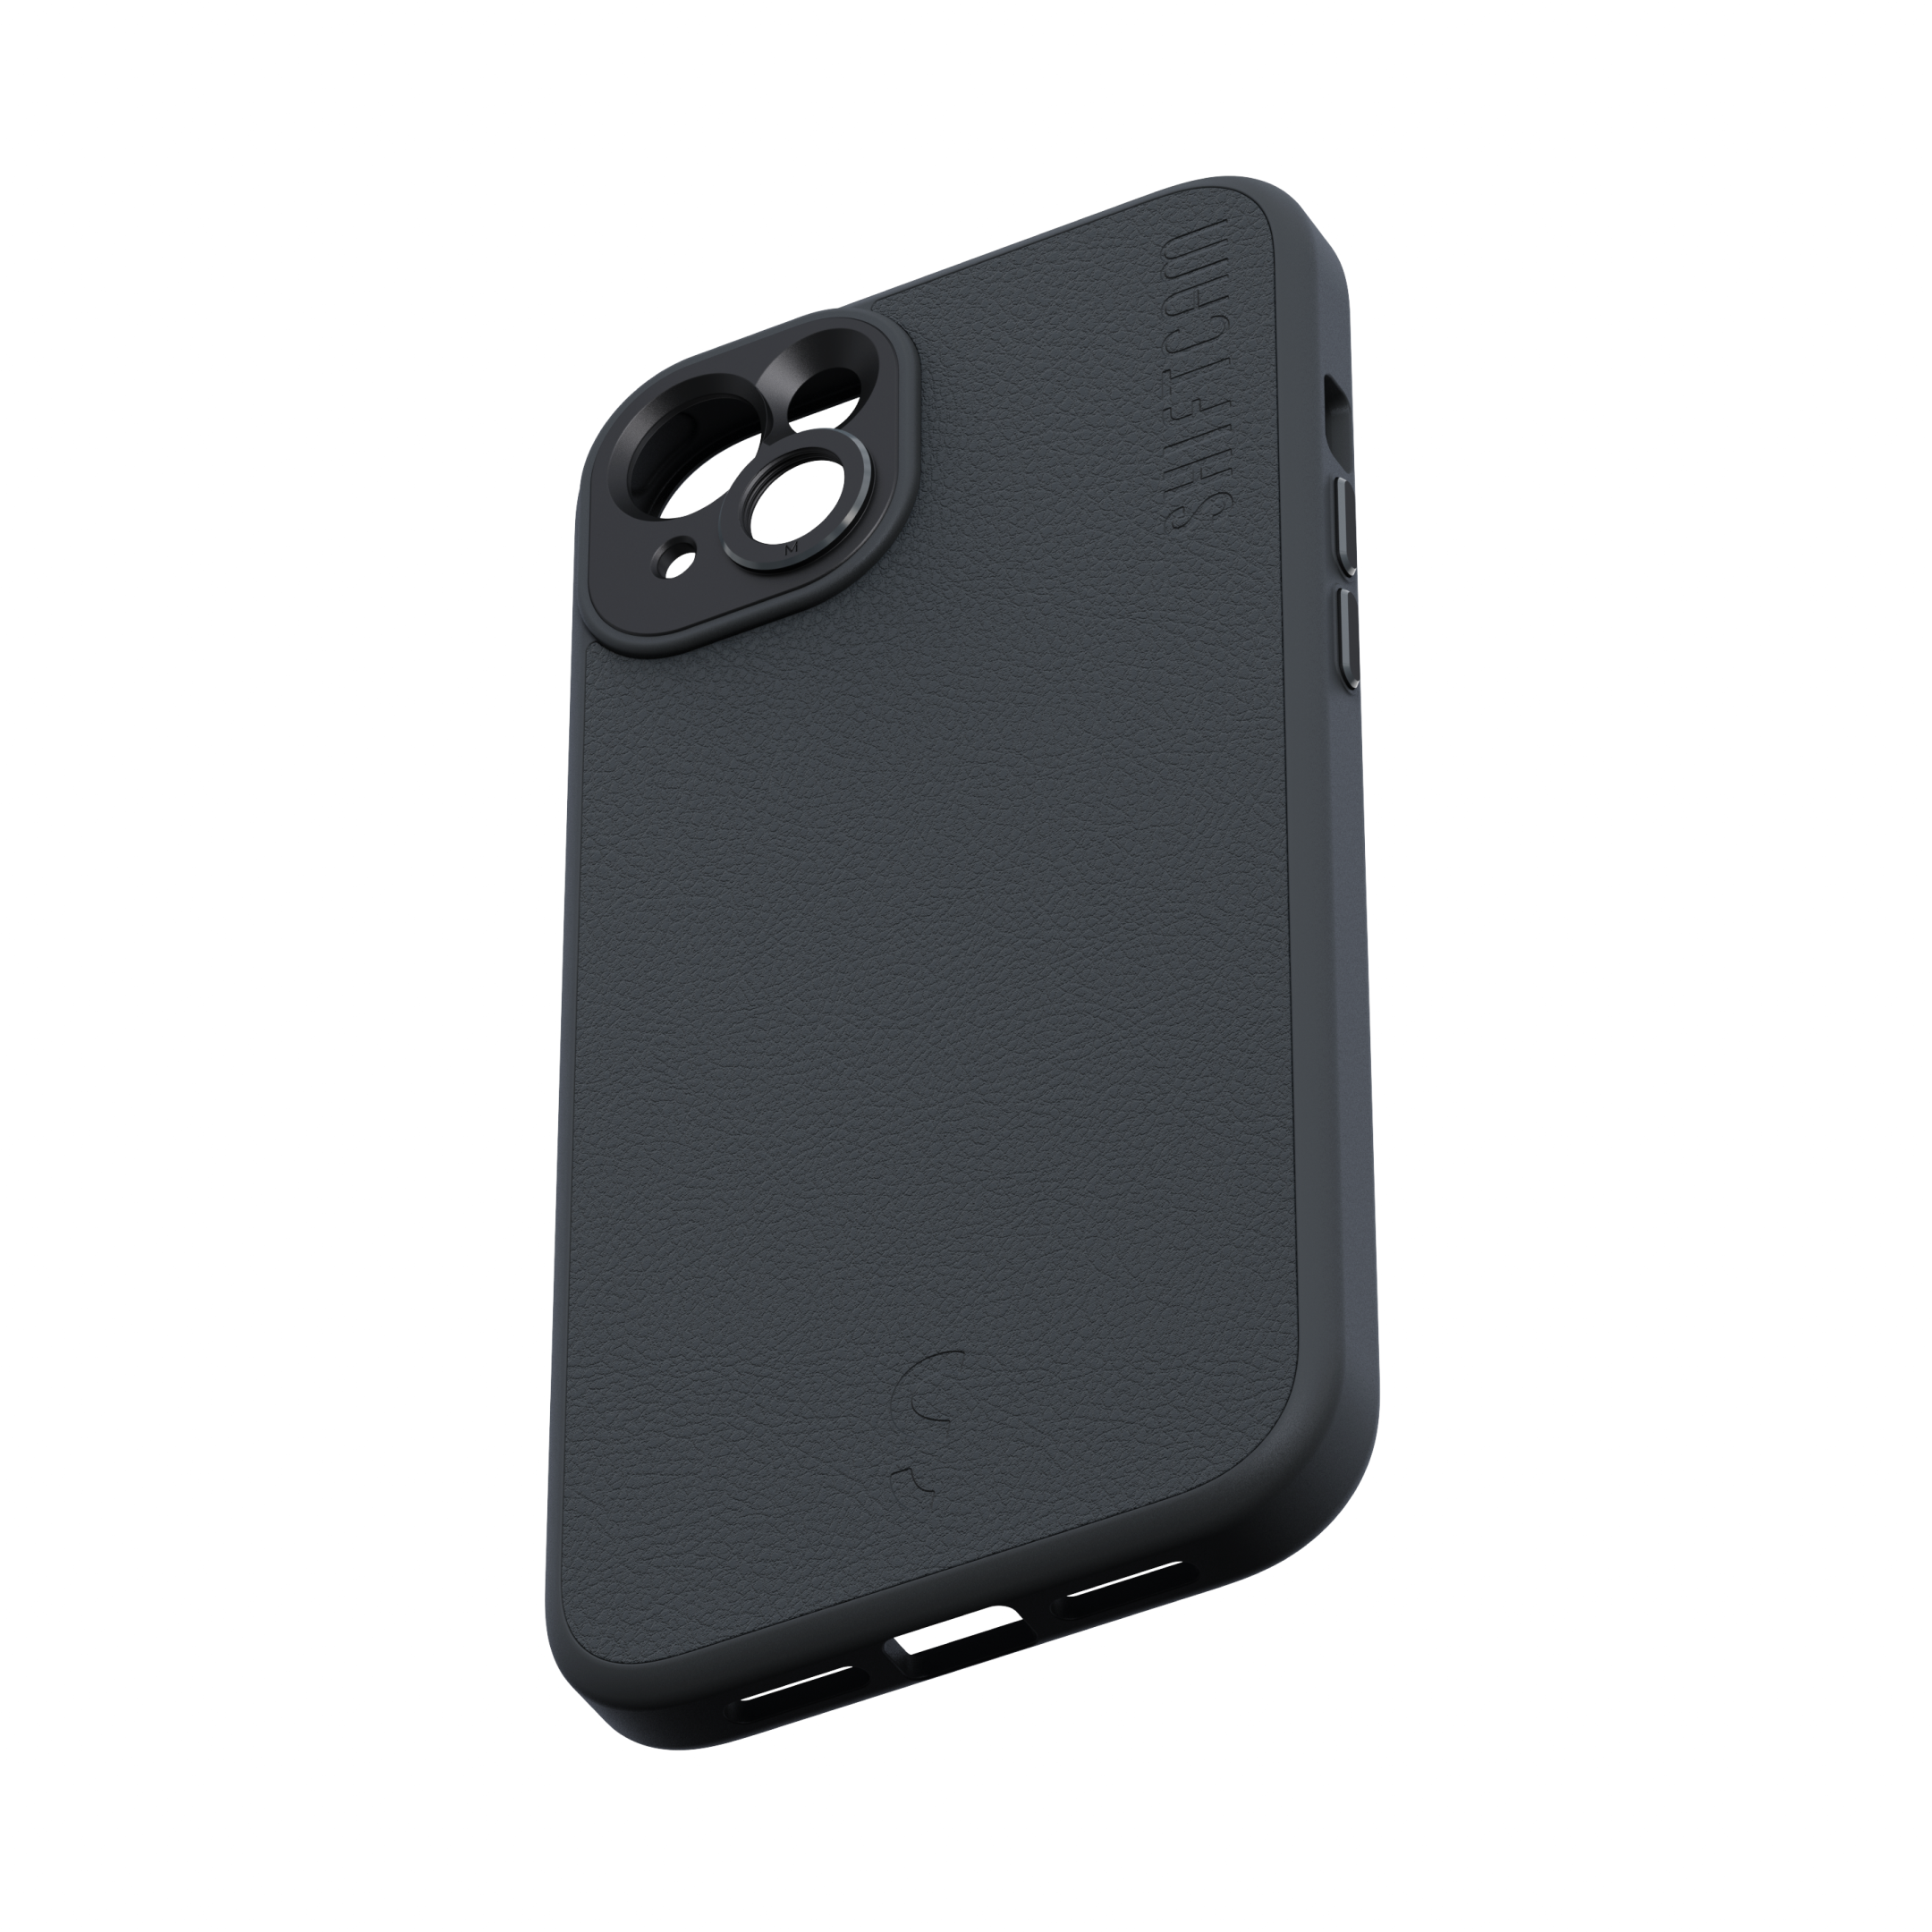 iPhone Backcover, Apple, SHIFTCAM Charcoal 14 Objektivhalterung, Case LensUltra Plus, mit